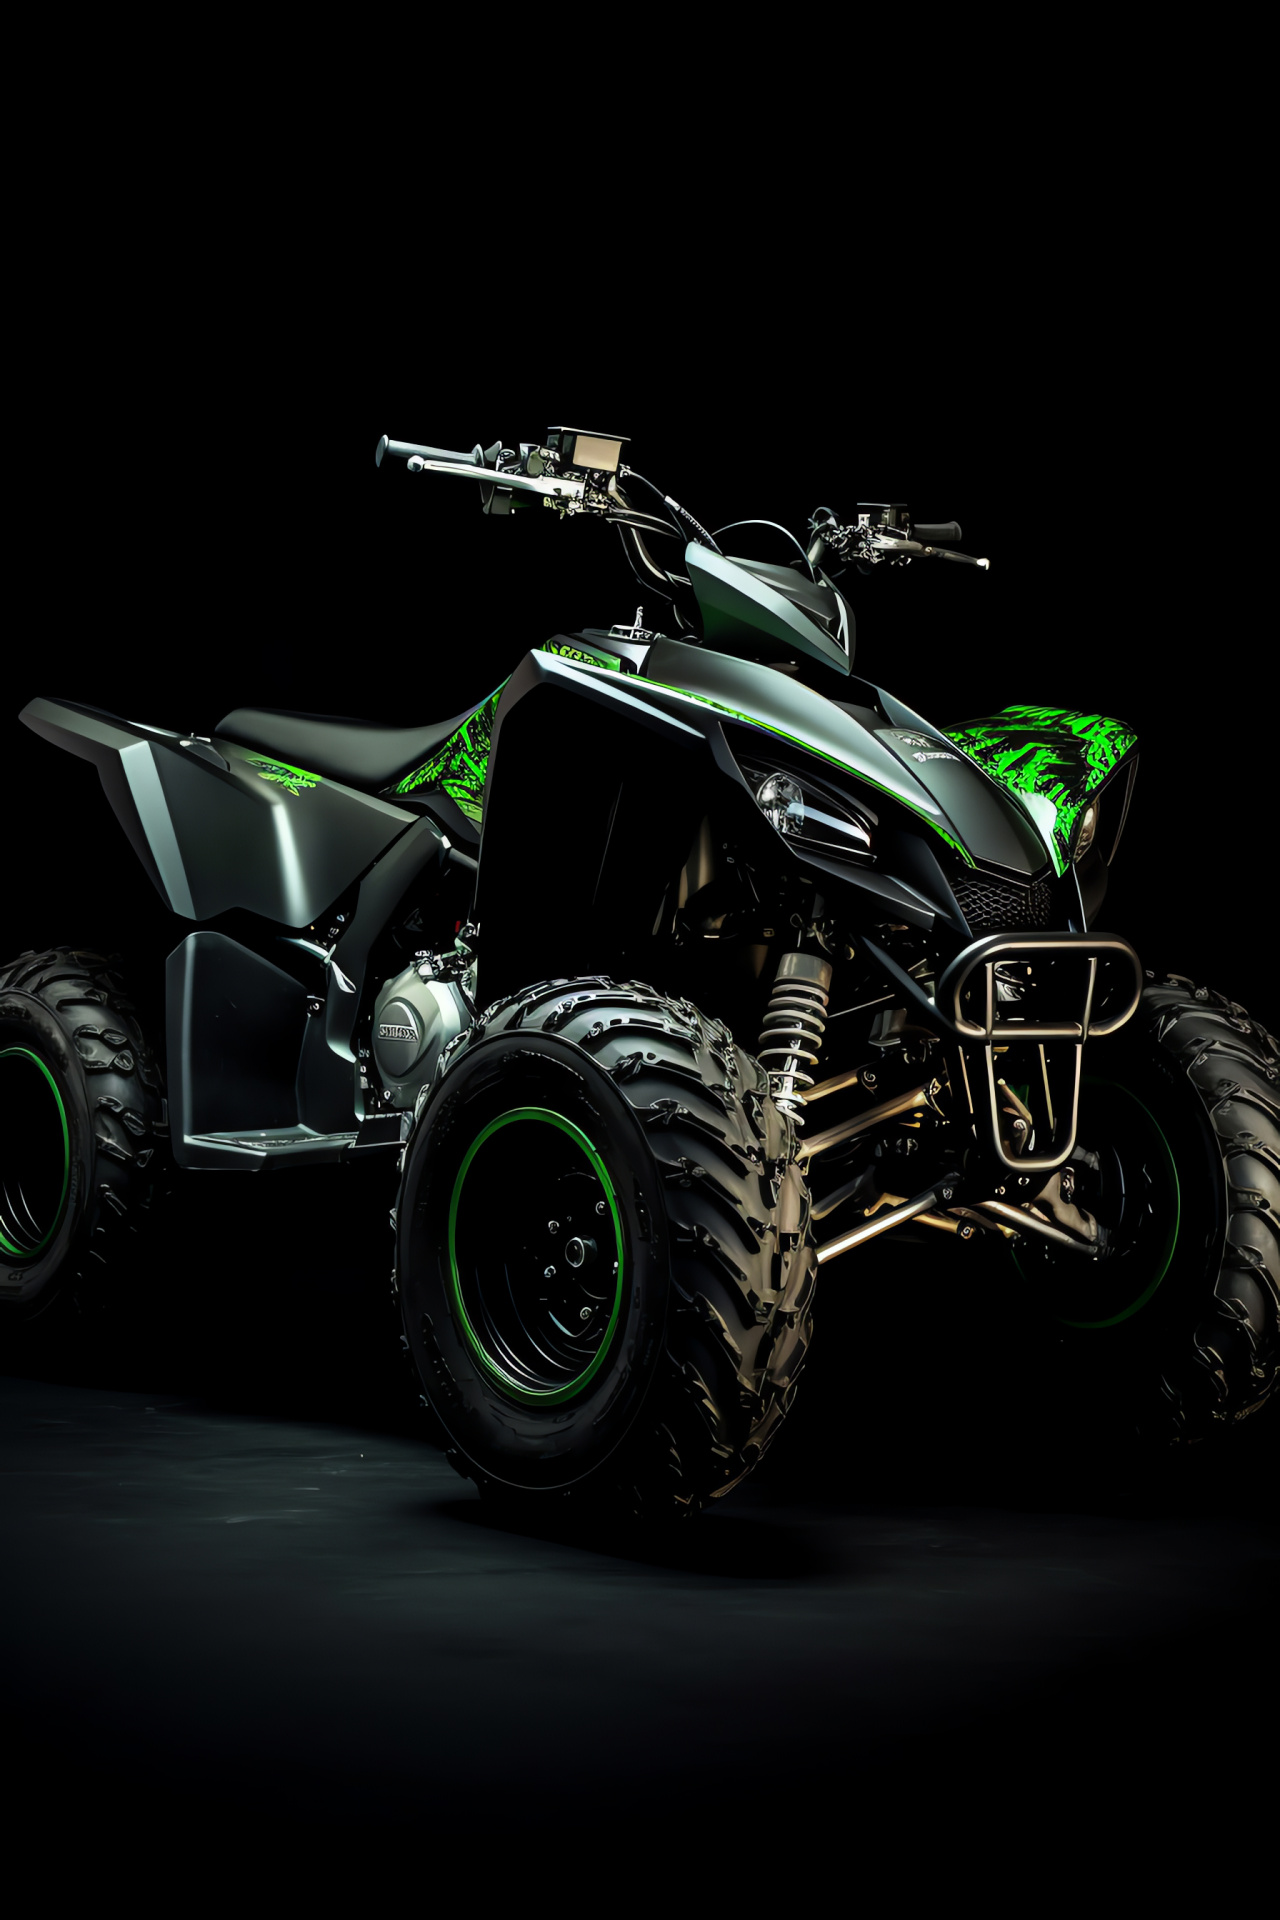 Raptor 700 Sport ATV model, Elevated angle, Solid backdrop, Striking green color, Off-road style, HD Phone Wallpaper